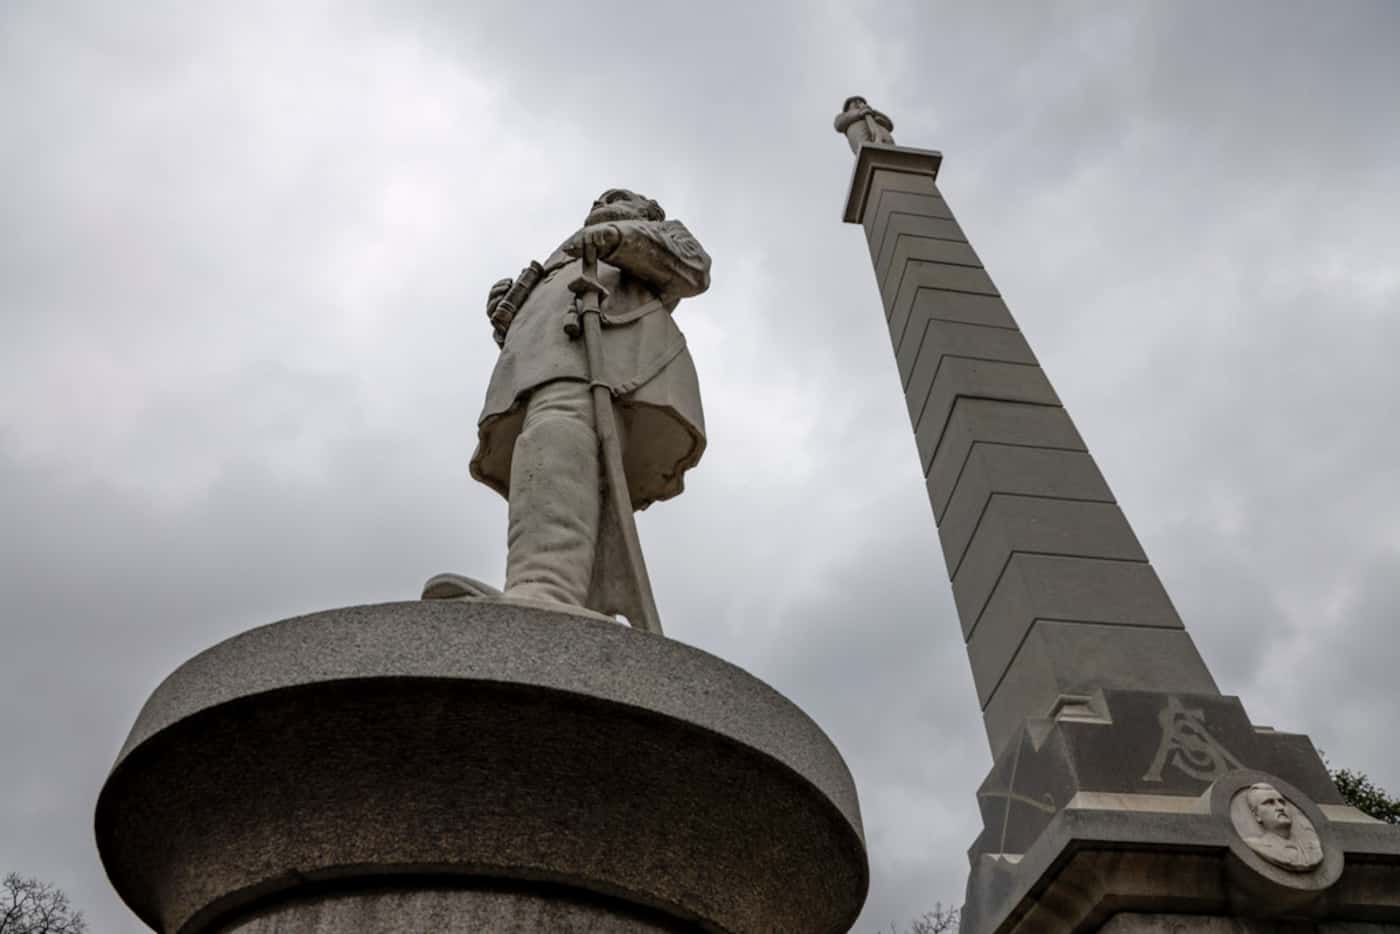 The Confederate War Memorial in downtown Dallas must go, the City Council has decided.